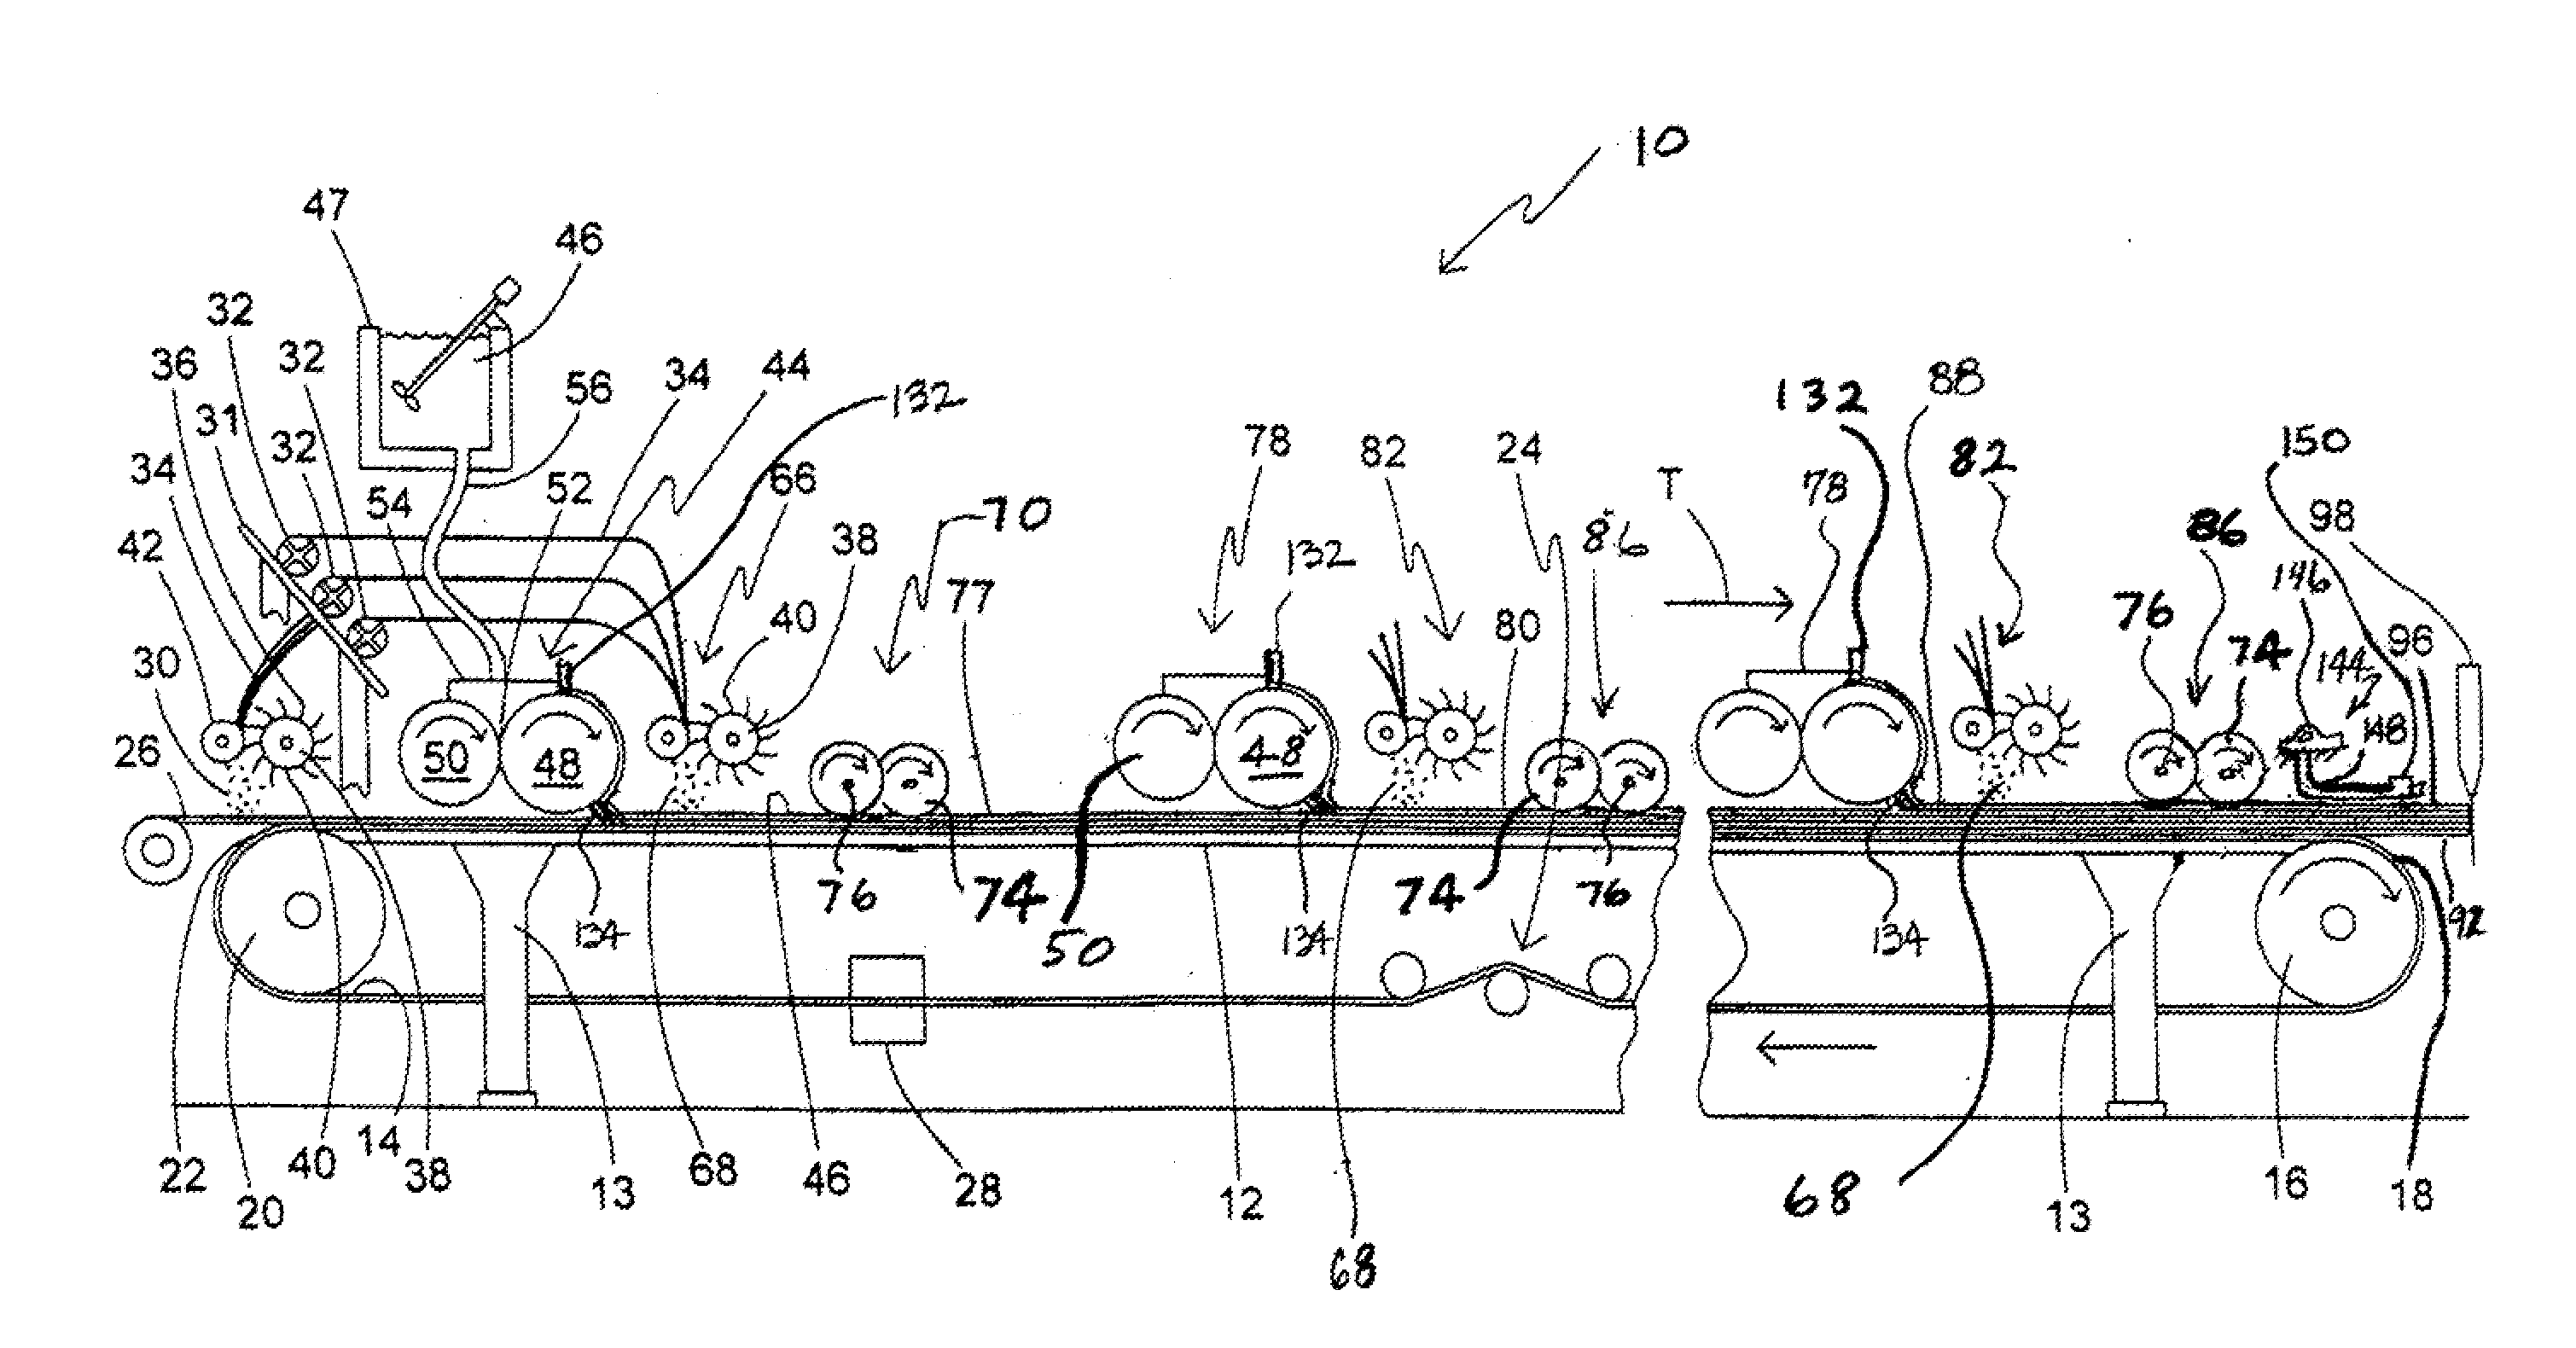 Method for wet mixing cementitious slurry for fiber-reinforced structural cement panels